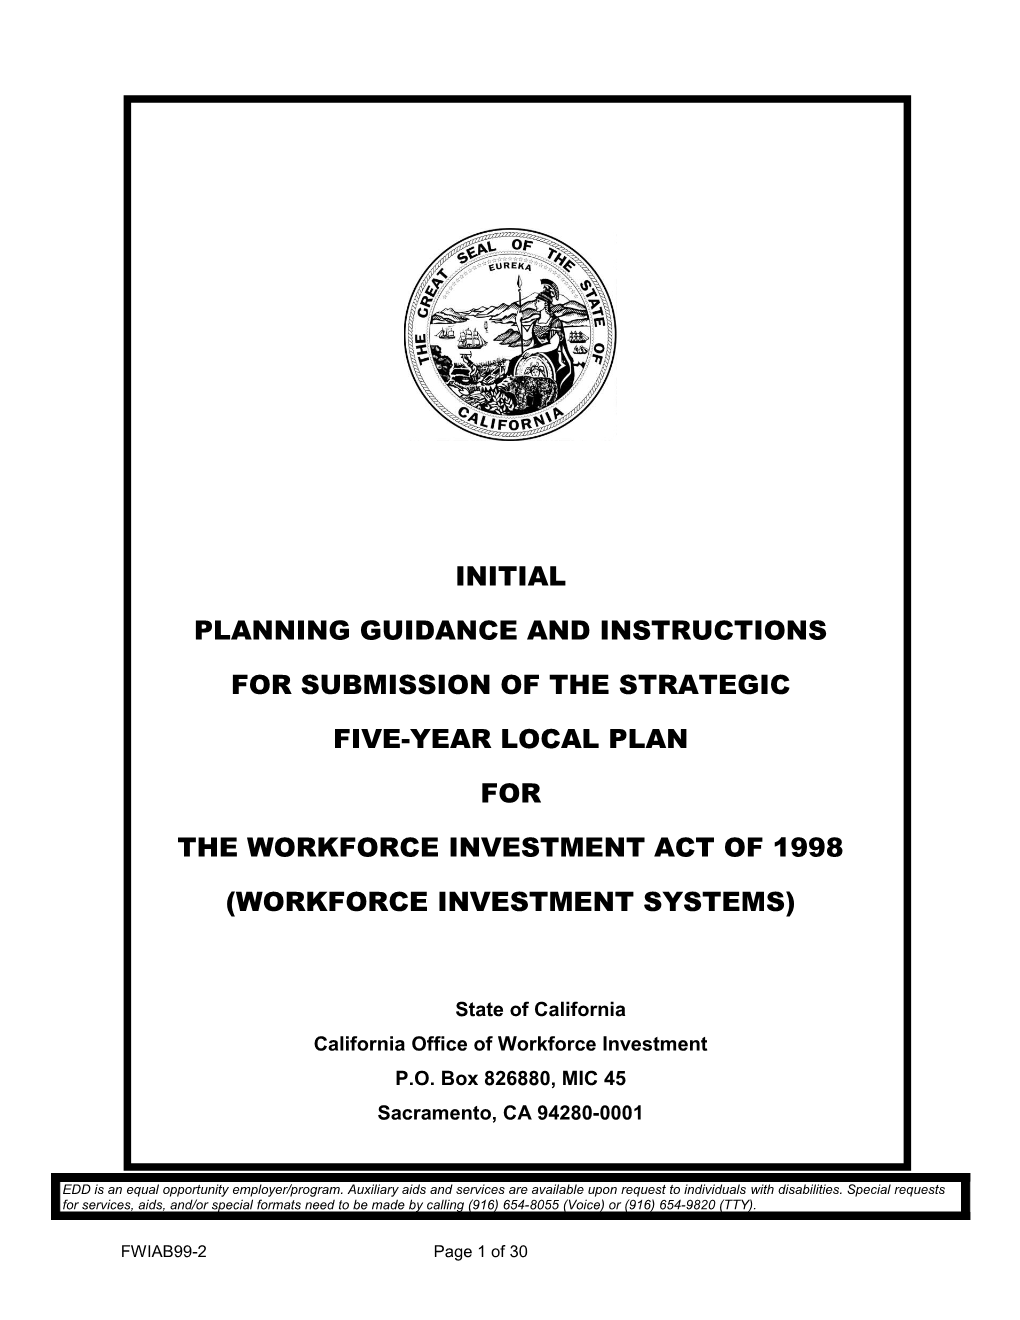 Planning Guidance and Instructions